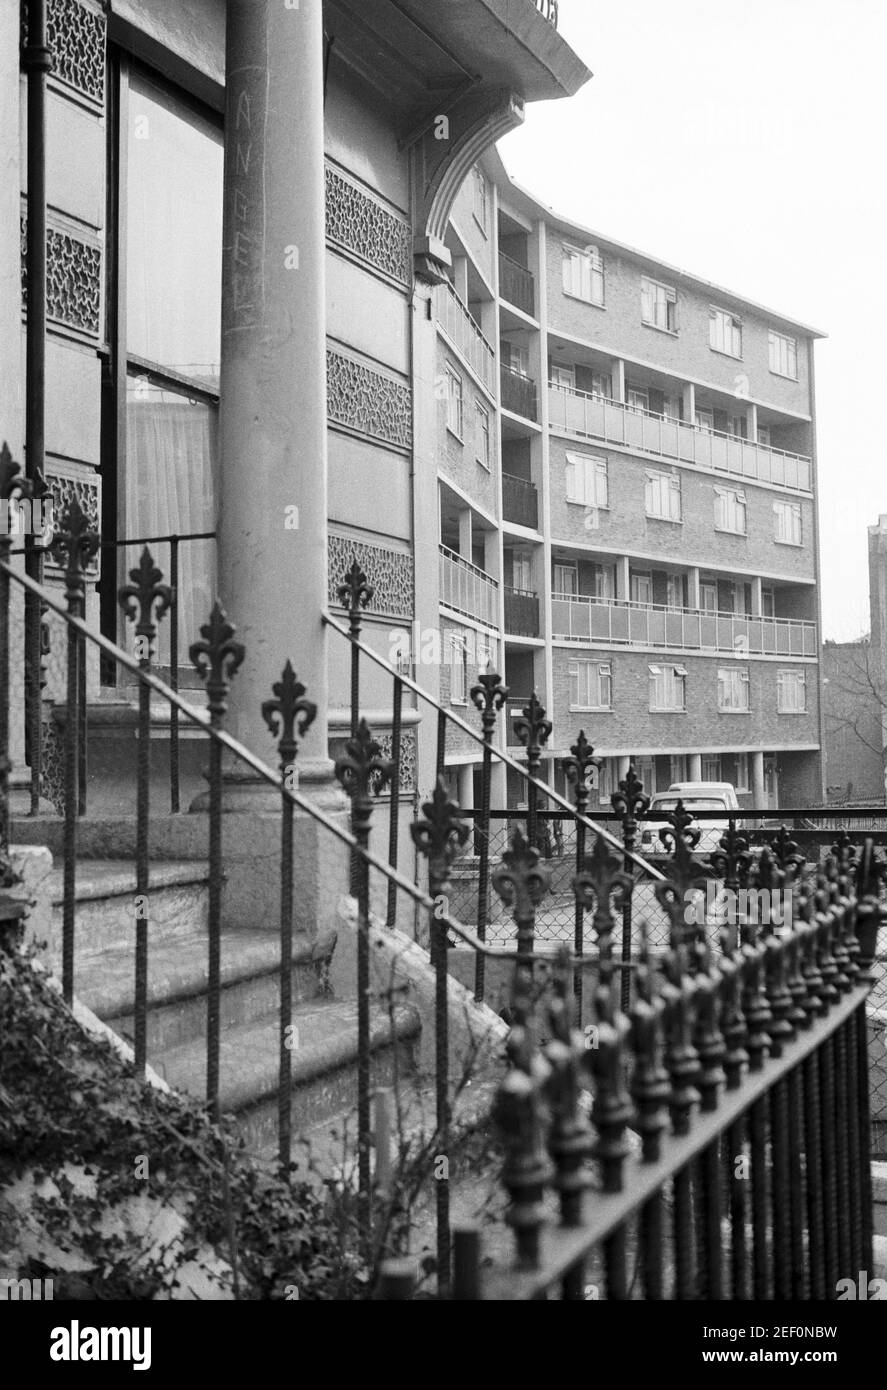 UK, West London, Notting Hill, 1973. Rundown & dilapidated large four-story houses are starting to be restored and redecorated. No.227 Westbourne Park Road & modern block of flats the other side of Powis Gardens. 'ANGEL' Graffiti on the house pillar. Stock Photo